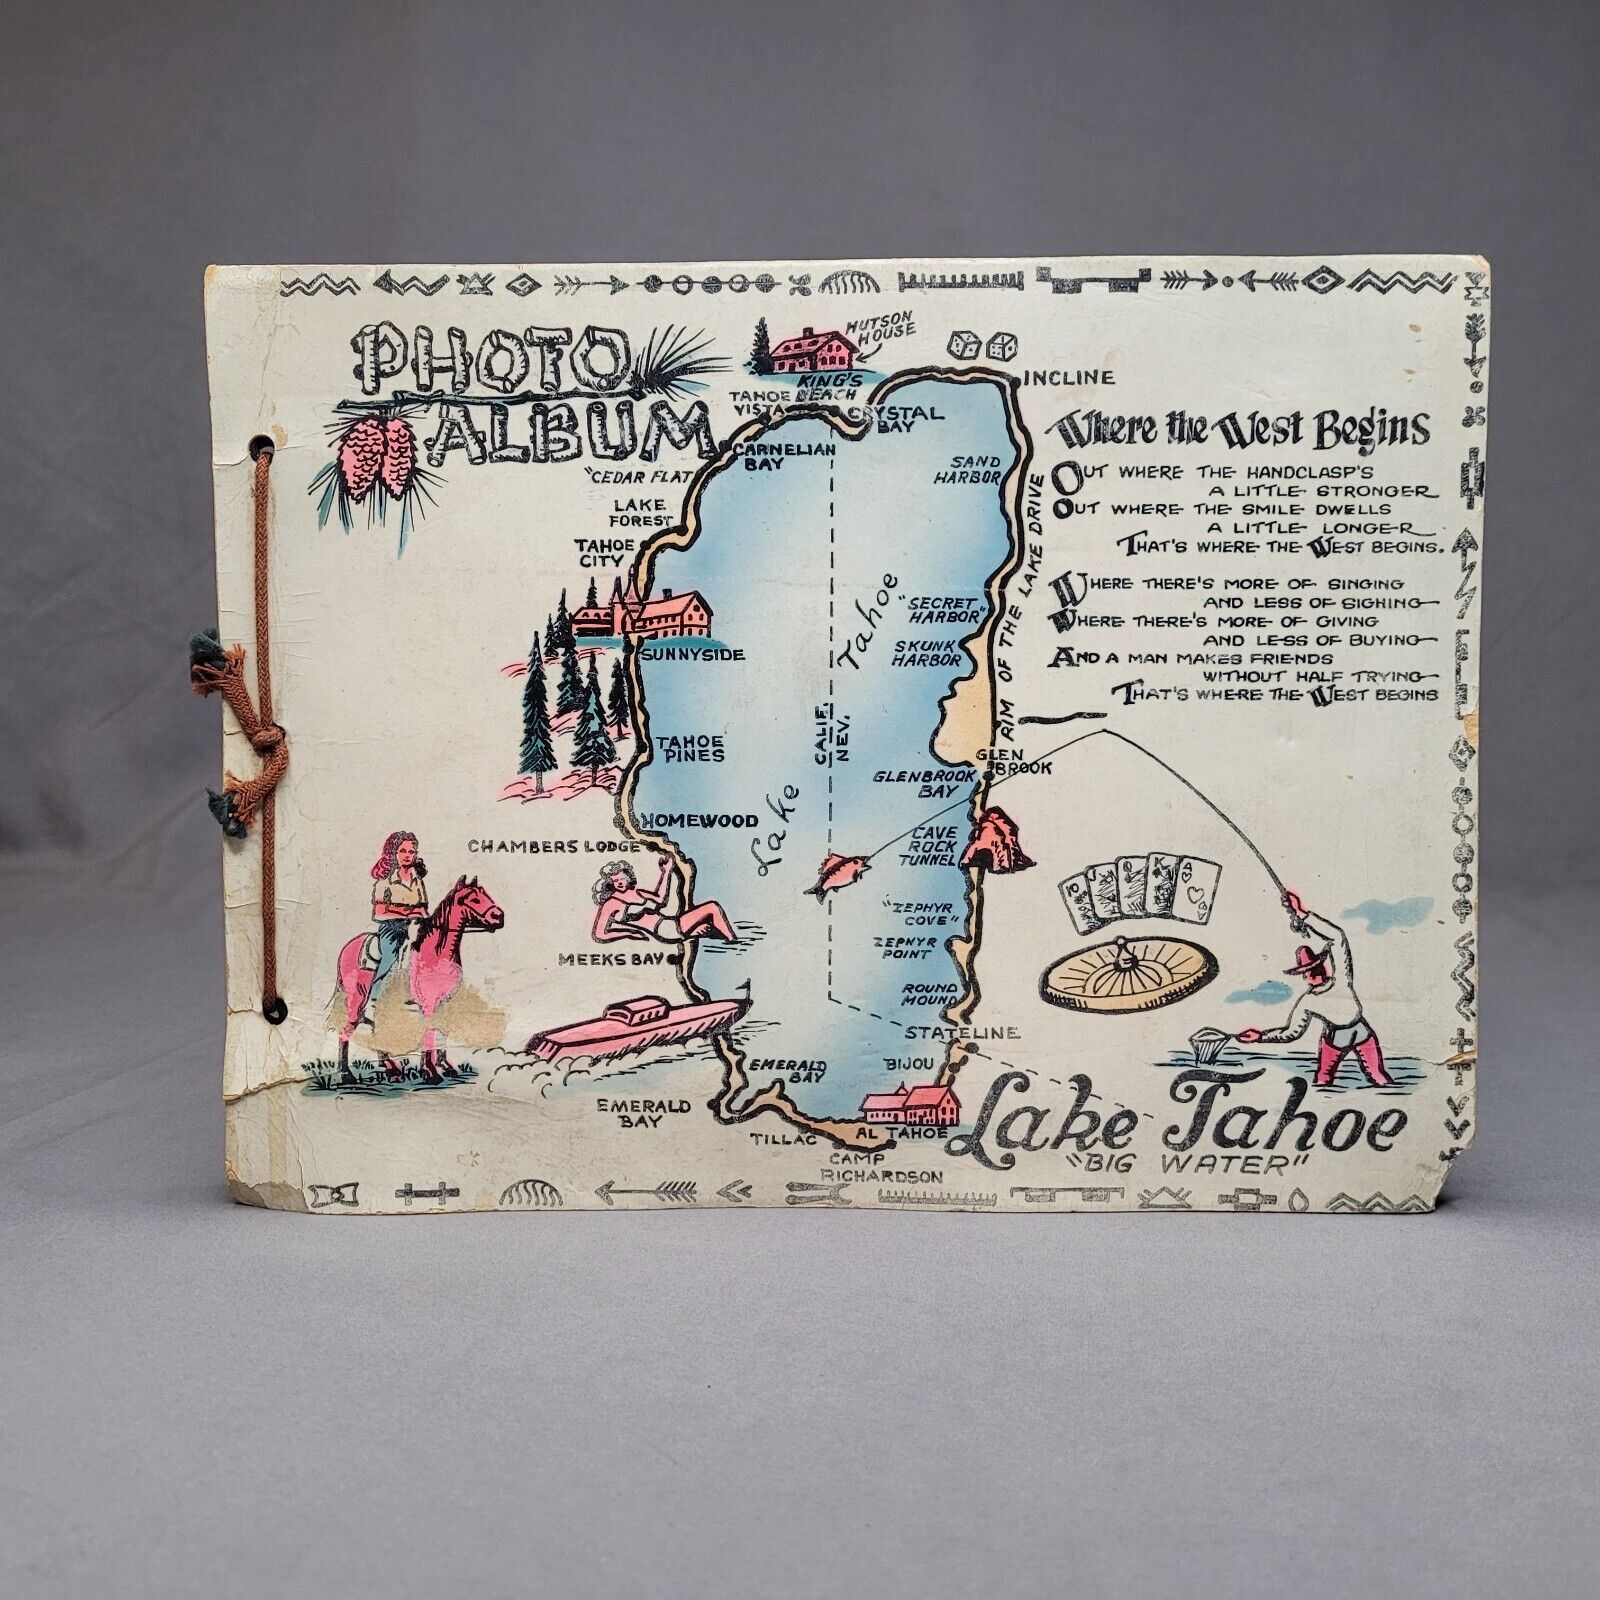 Vintage Lake Tahoe Photo Album Big Water String Bound No Photographs Included